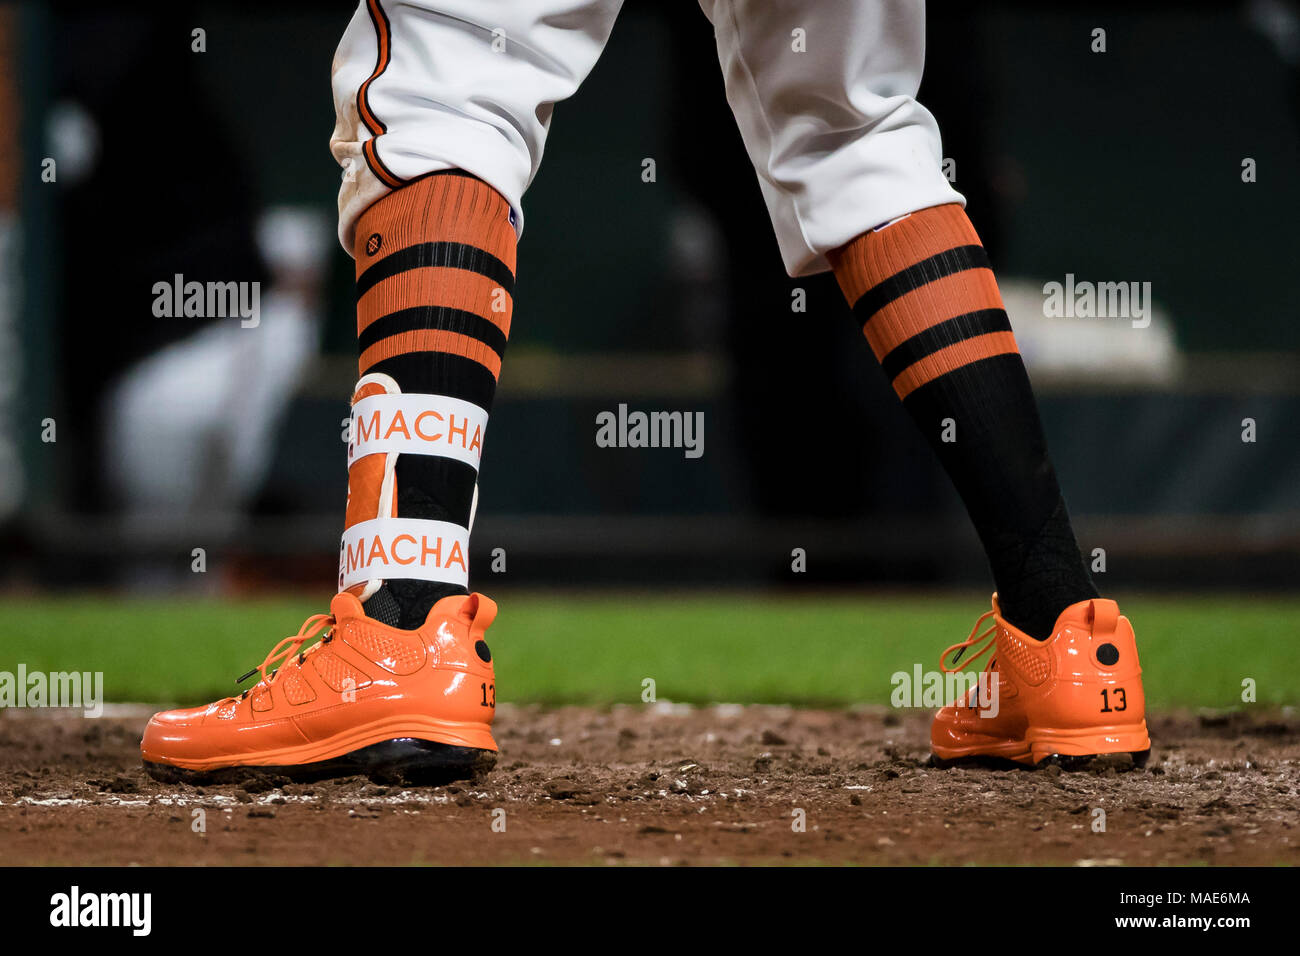 Baltimore, Maryland, USA. 31st Mar, 2018. A view of Baltimore Orioles  shortstop Manny Machado (13) shoes while at bat during MLB game between  Minnesota Twins and Baltimore Orioles at Oriole Park at